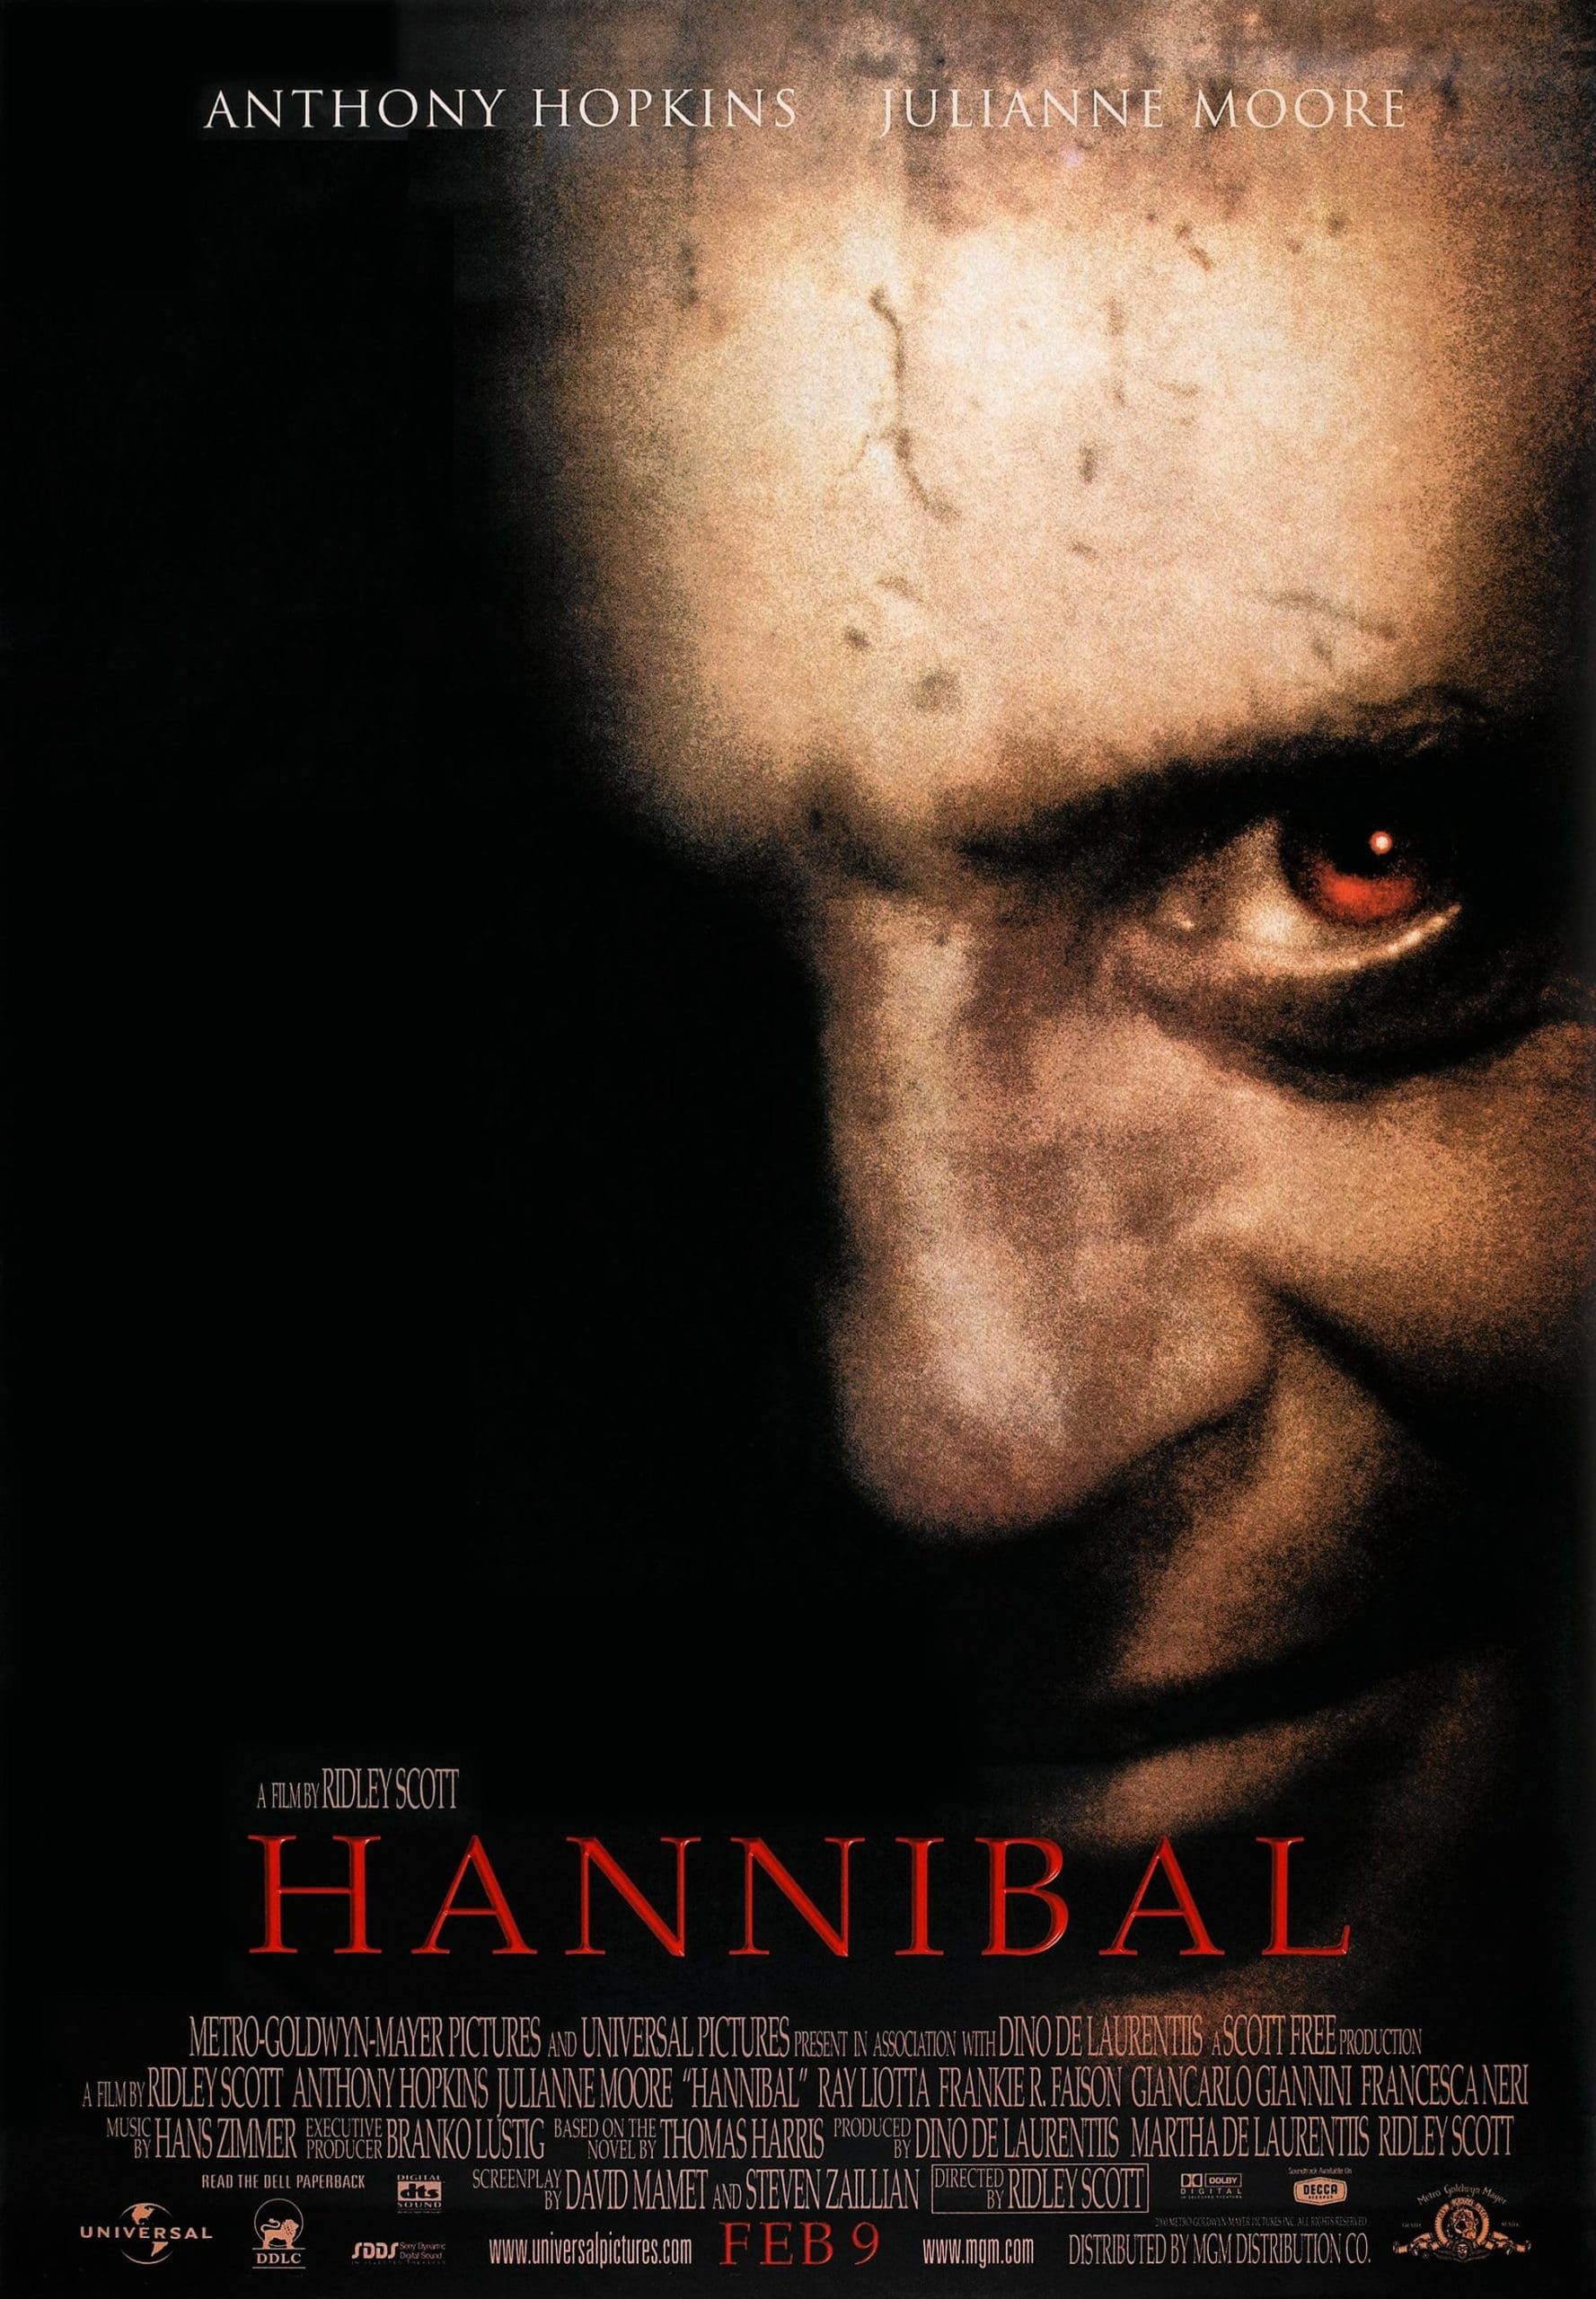 Hannibal poster with Anthony Hopkins